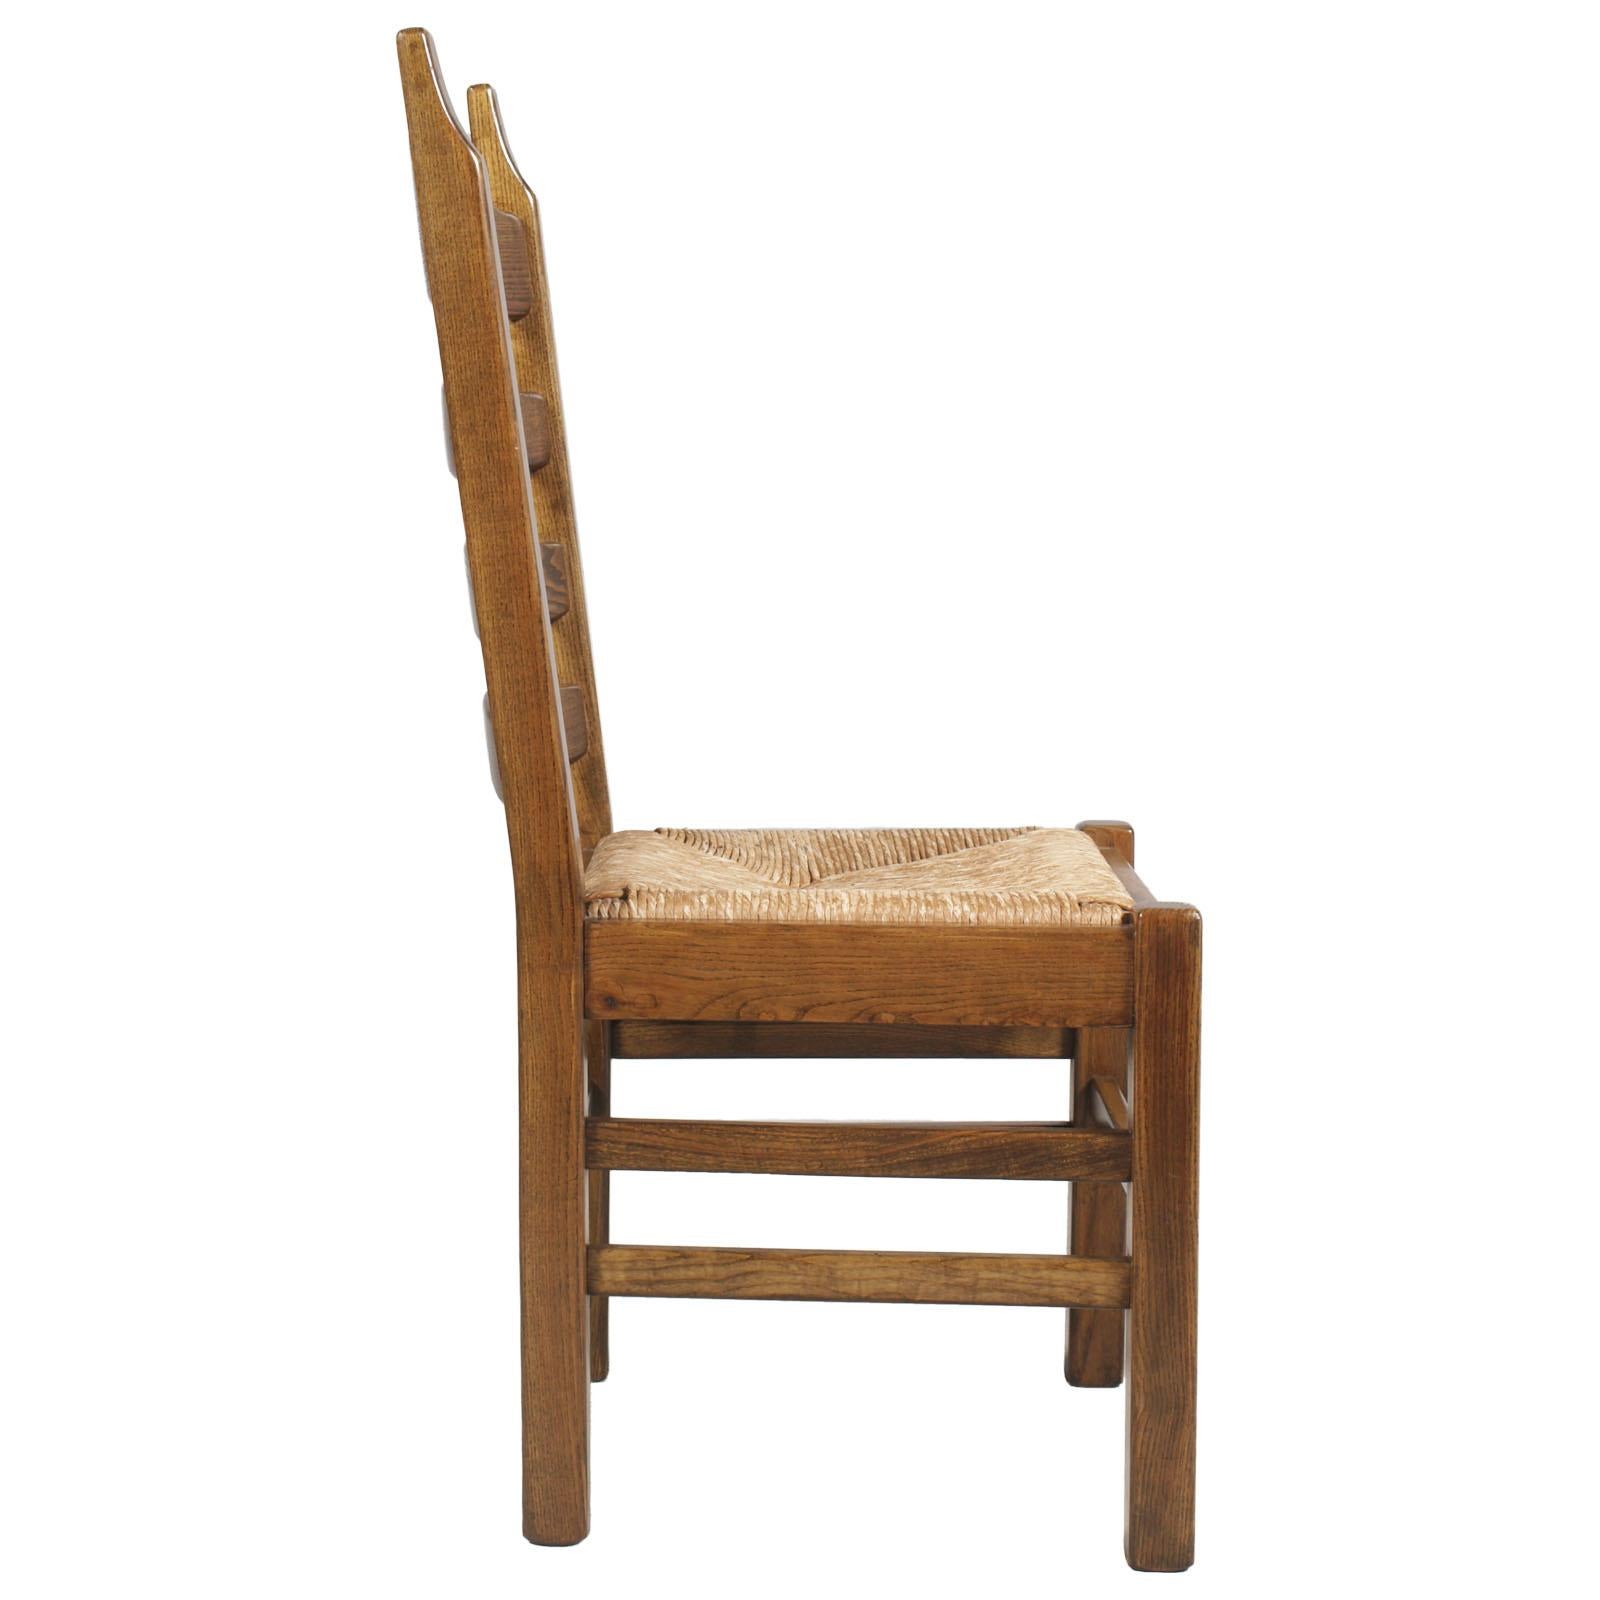 Renaissance Revival Tuscany Renaissance, Hand Carved Solid Walnut Twelve Straw Chairs For Sale